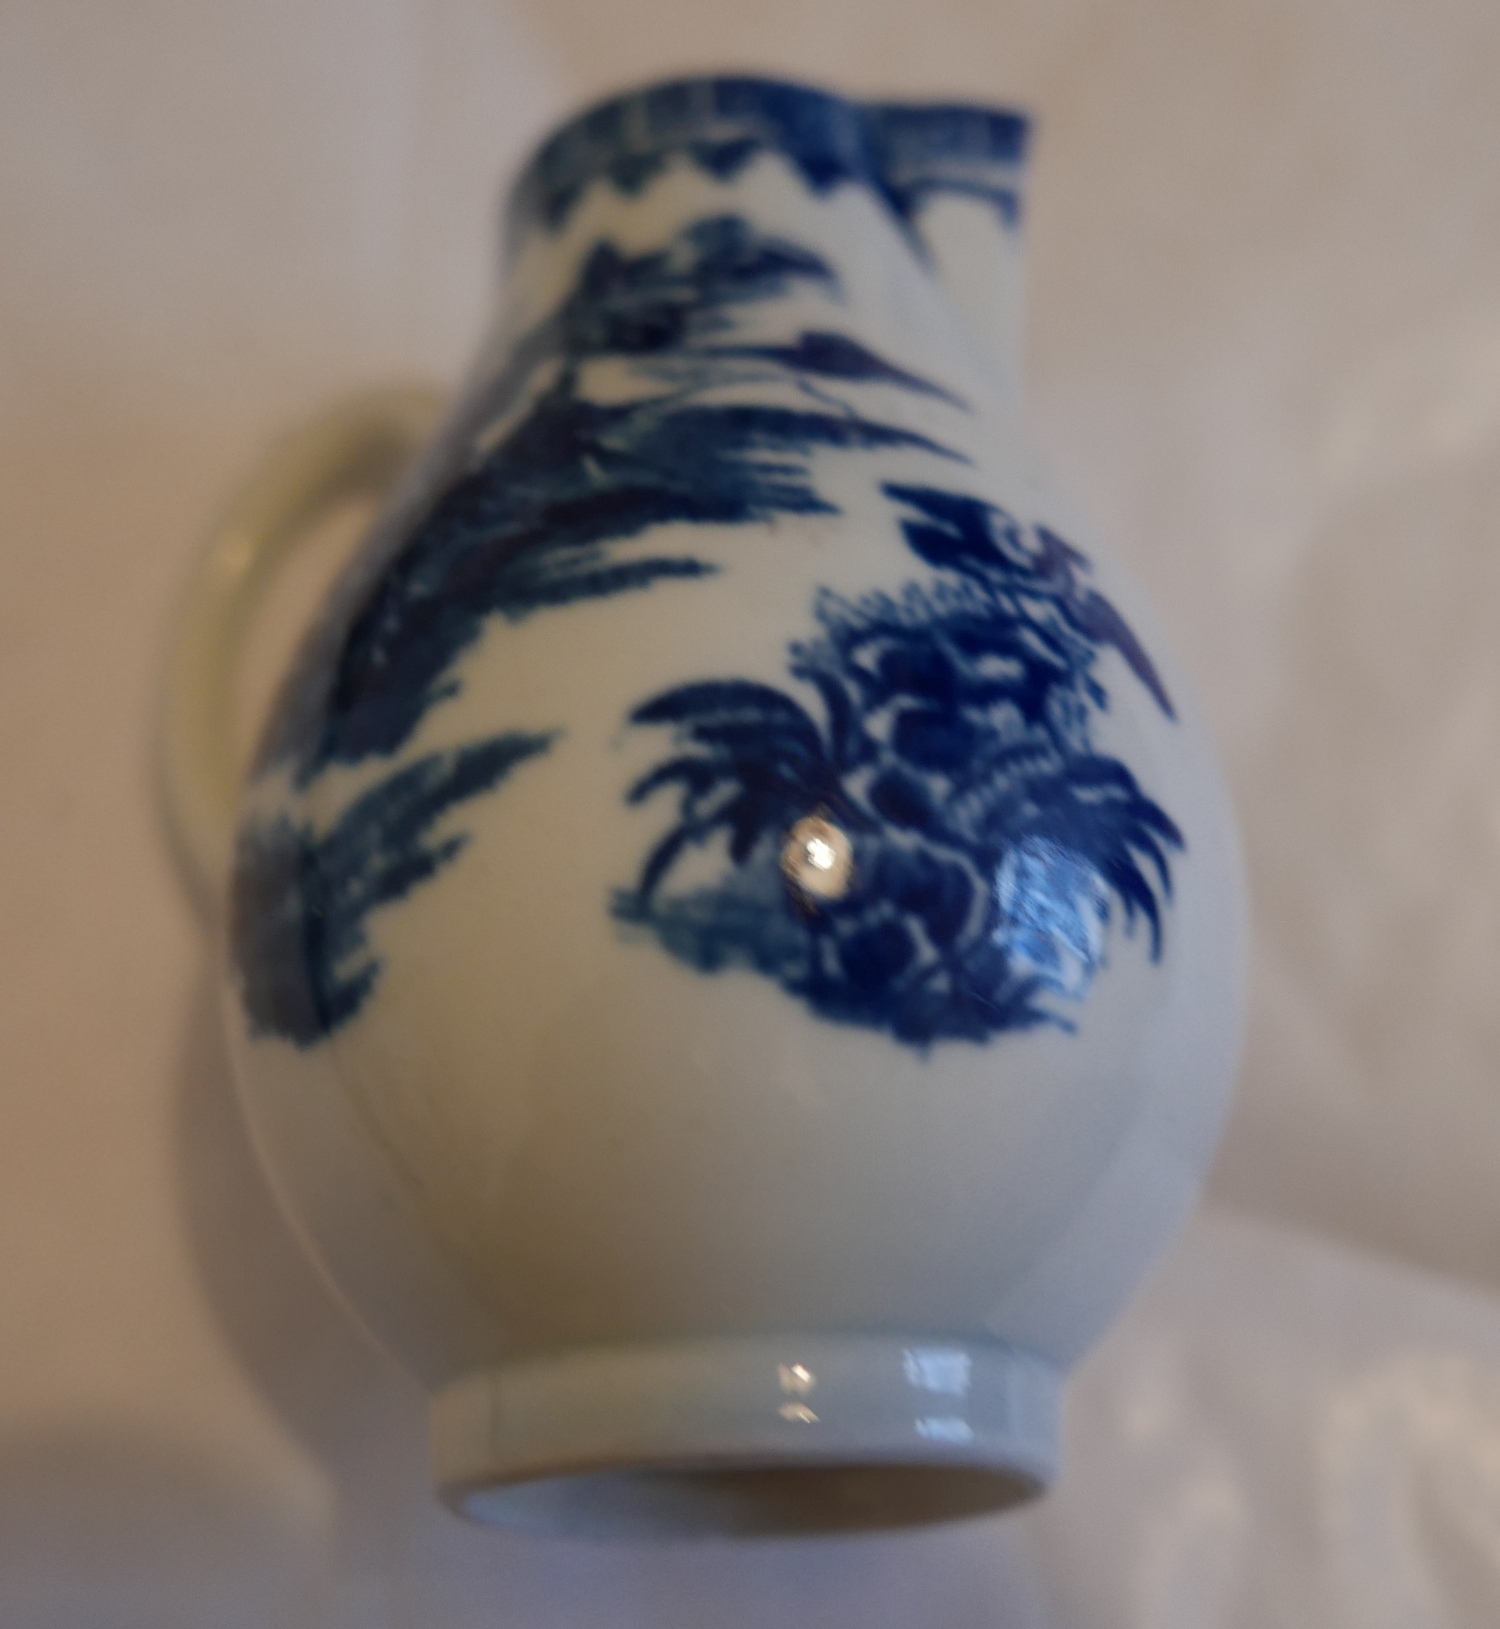 Antique 18th Century English Porcelain Sparrow Beak Jug 3 1/2" tall - excellent cond. - Image 3 of 7